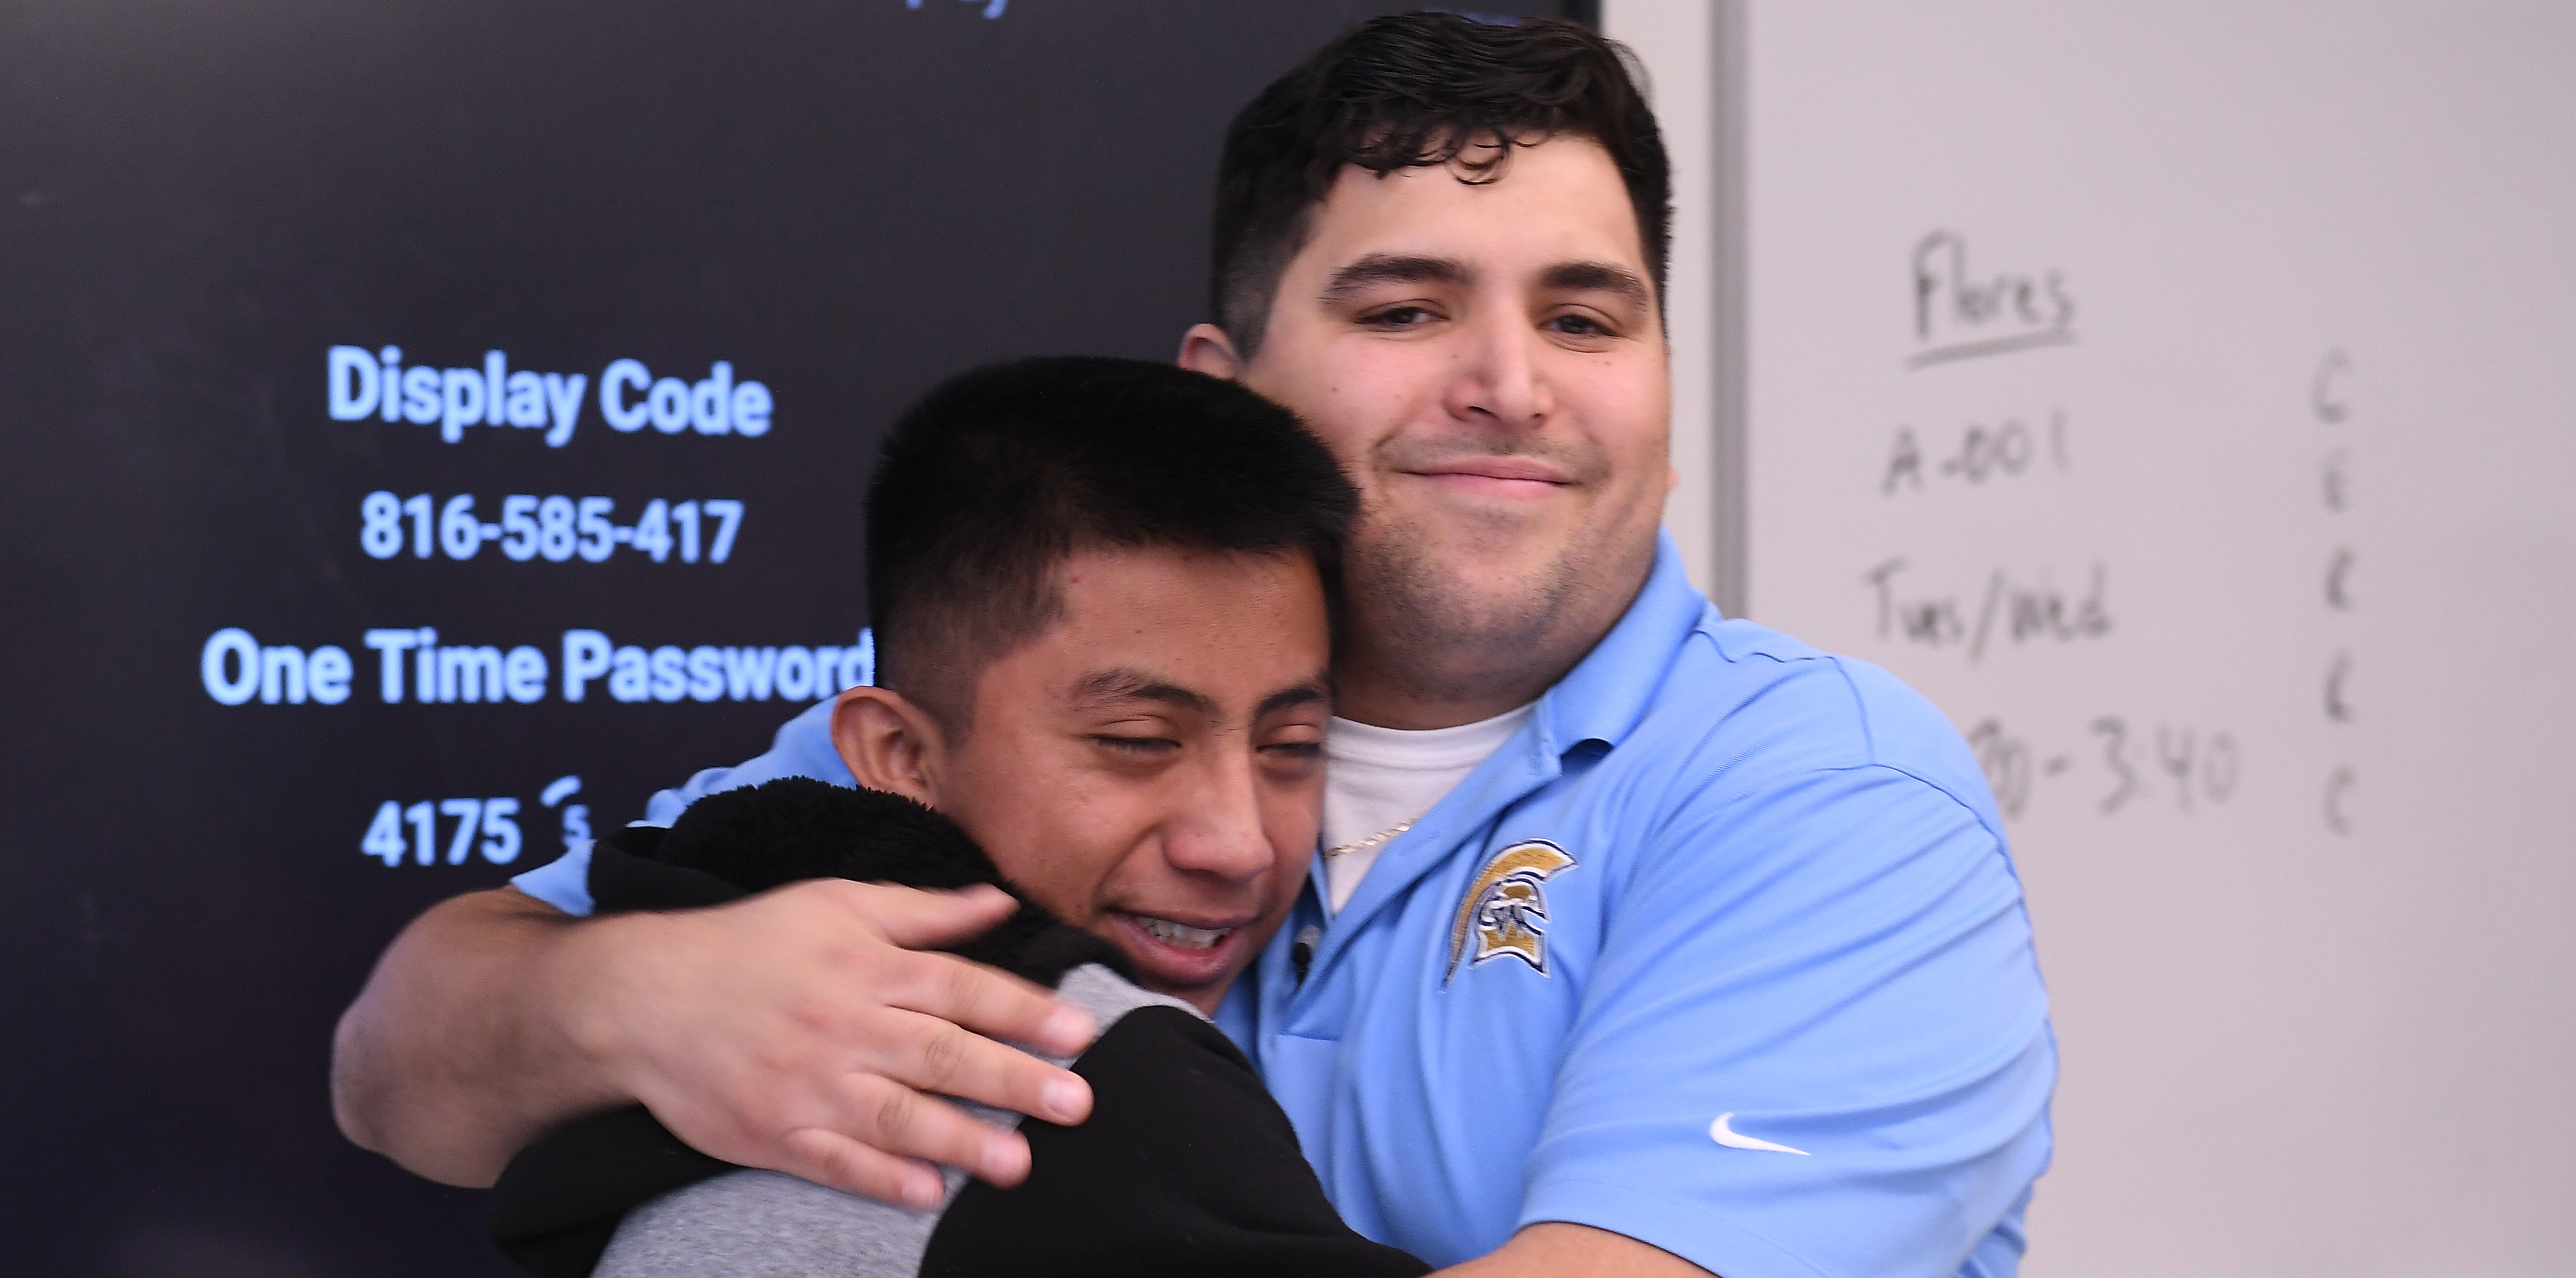 Caleb Flores hugging one of his male students